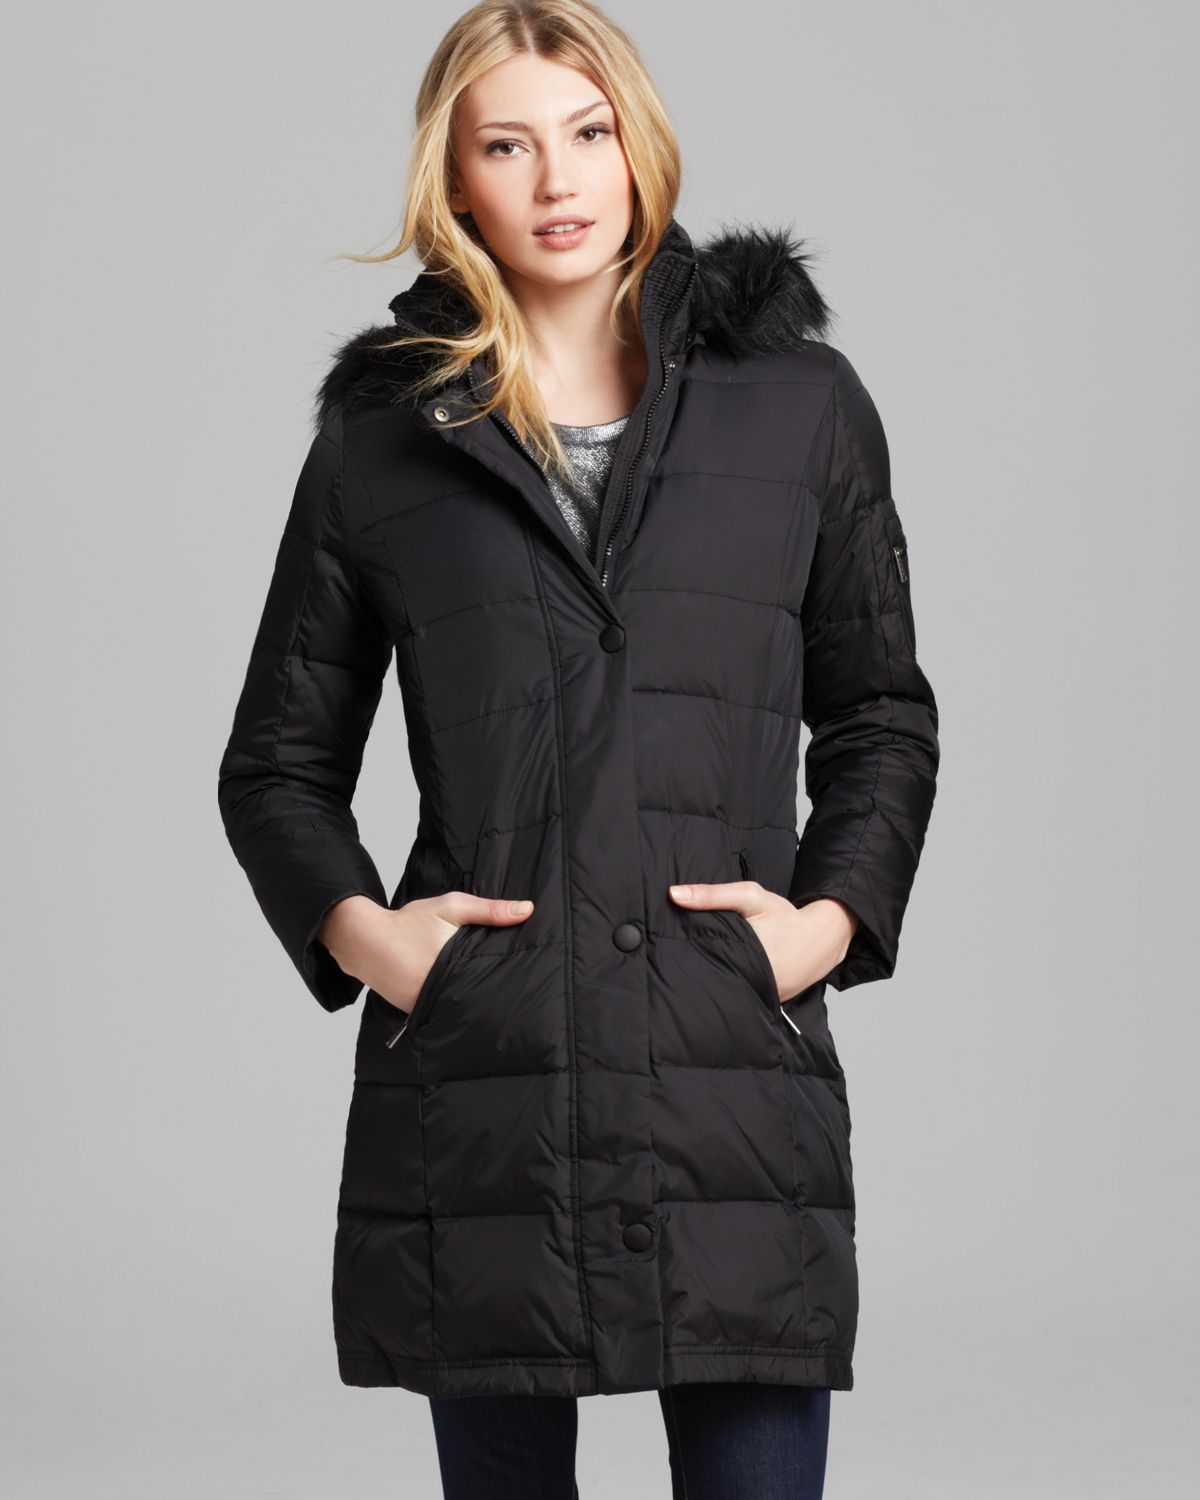 Lyst - Dkny Down Puffer Coat with Faux Fur Trim in Black